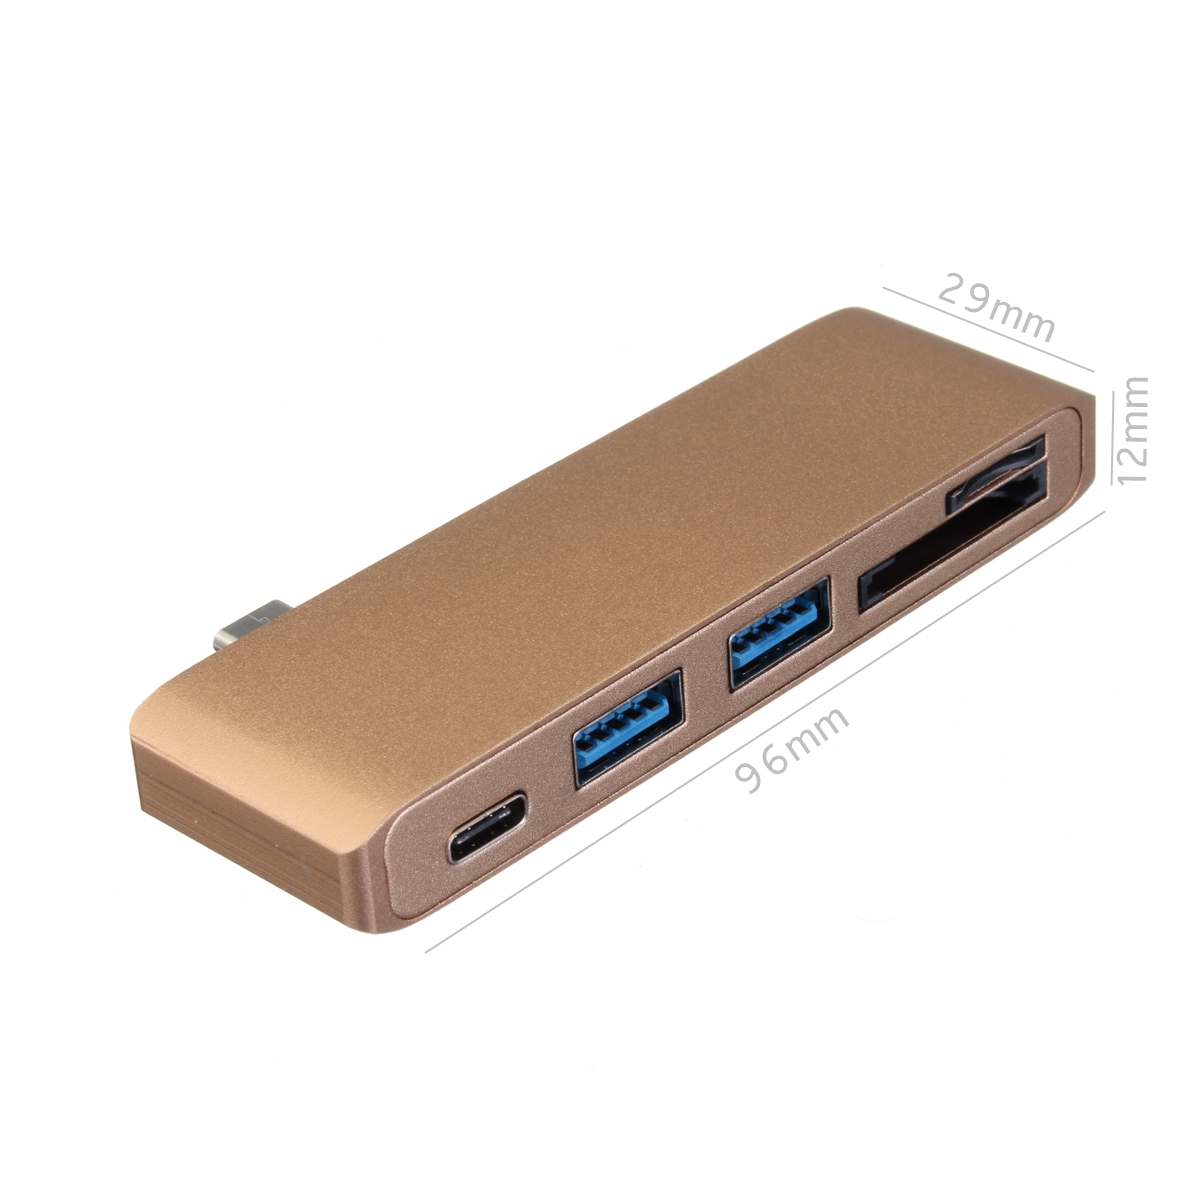 Multifunction USB Hub Type-C to Type-C USB 3.0 2Ports TF SD Card Reader for Laptop PC 11